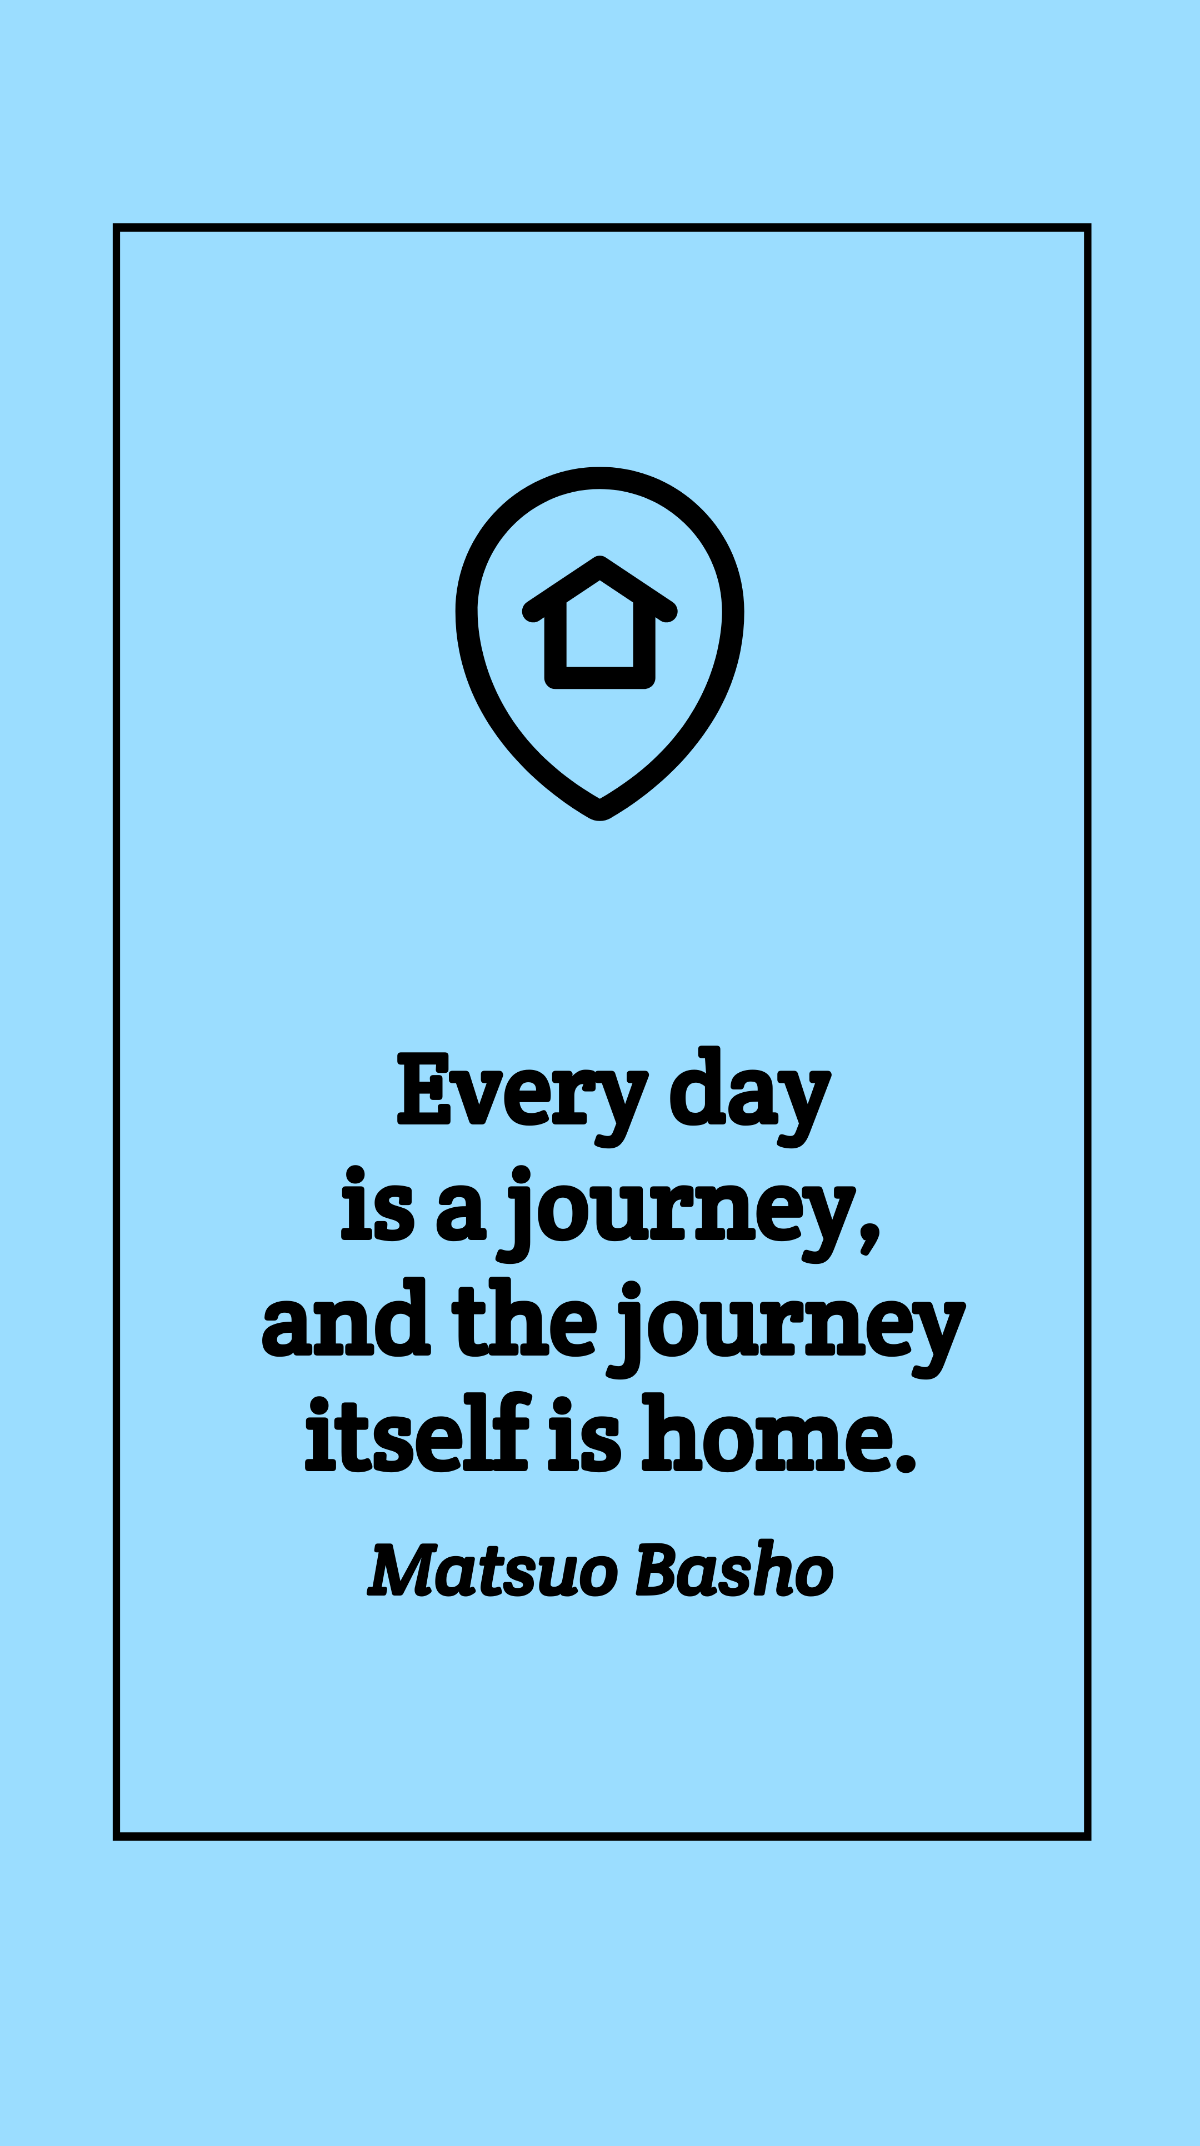 Free Matsuo Basho - Every day is a journey, and the journey itself is home. Template